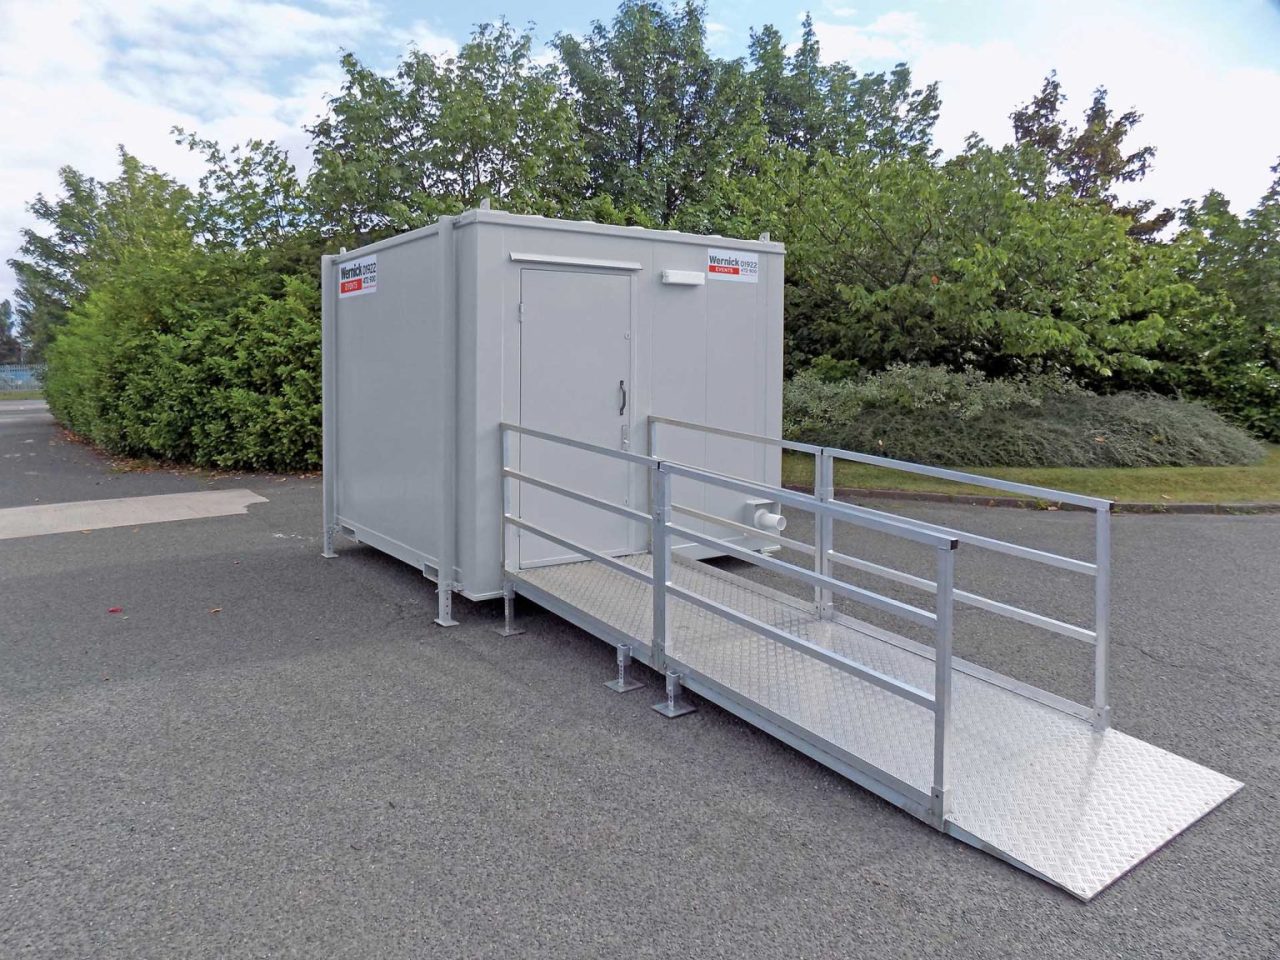 Wernick Events disabled shower toilet with ramp